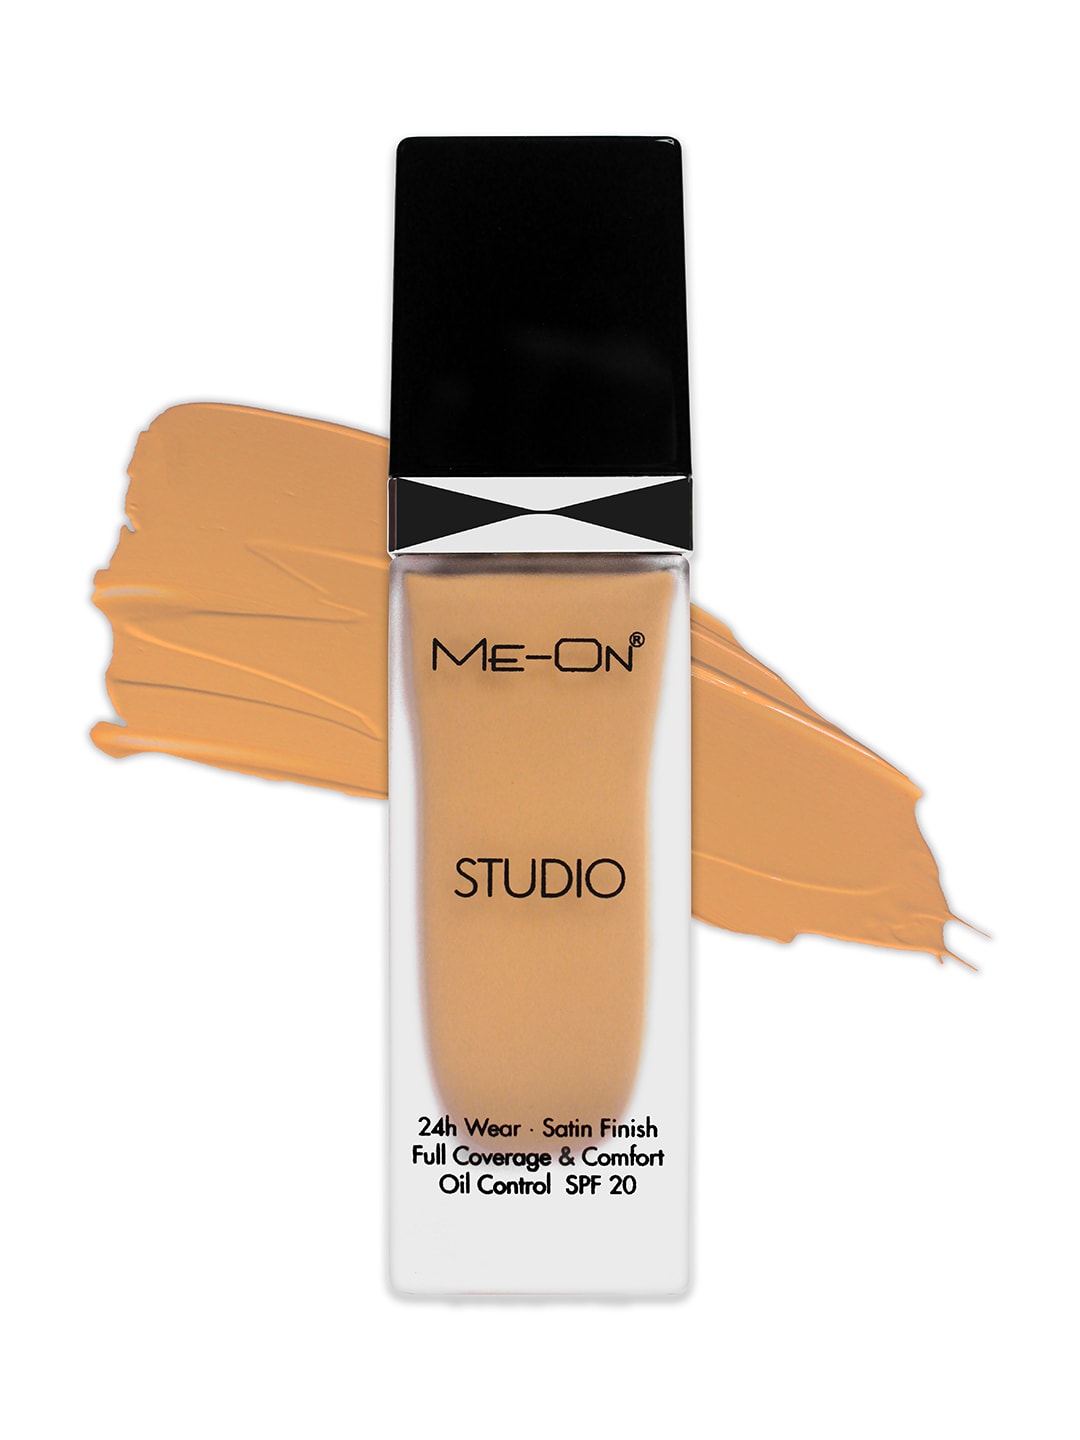 ME-ON Studio Foundation - Shade 23 Price in India